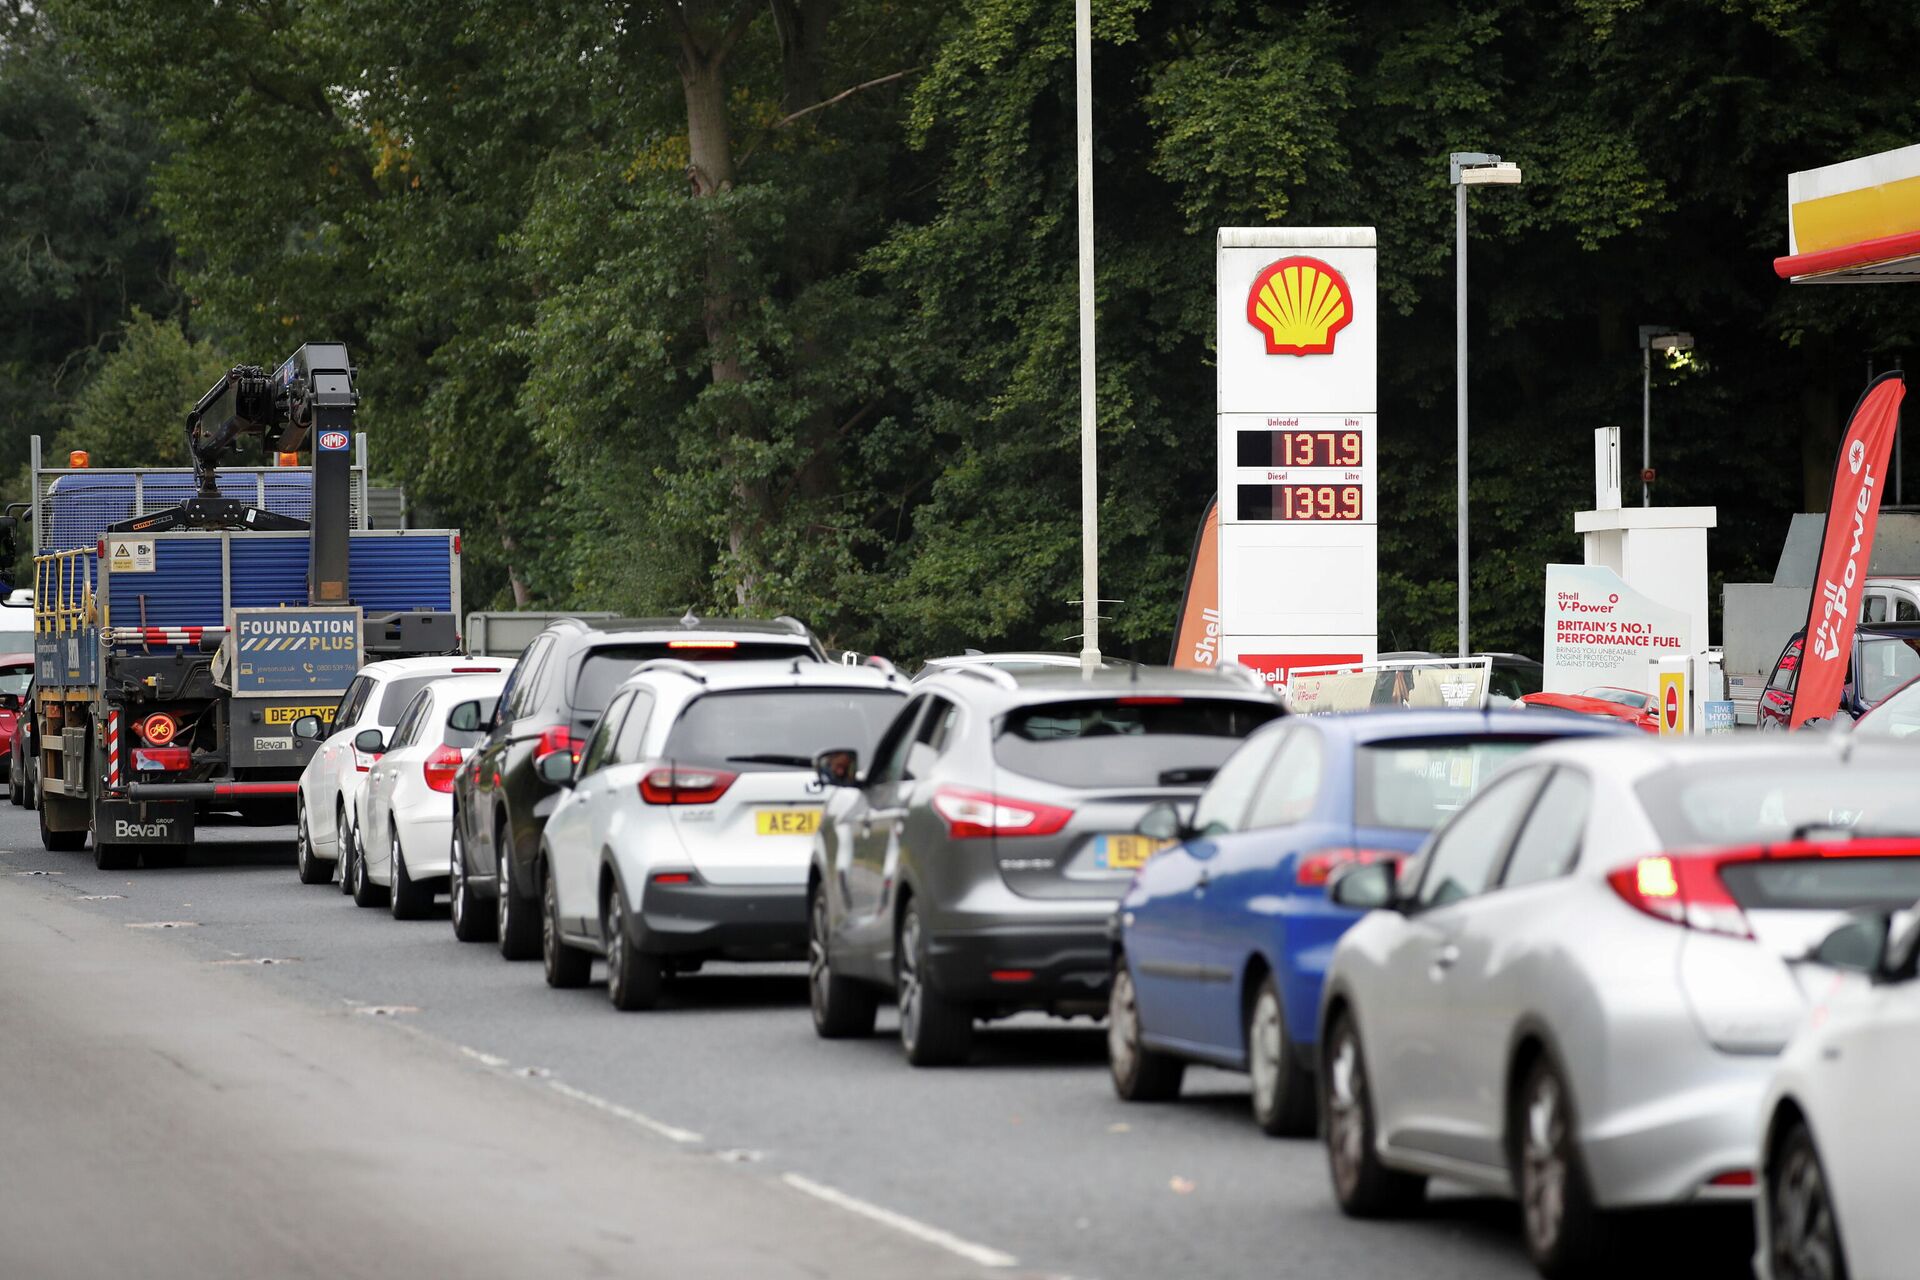 Vehicles queue to refill outside a Shell fuel station in Redbourn, Britain, September 25, 2021. REUTERS/Peter Cziborra - Sputnik International, 1920, 28.09.2021